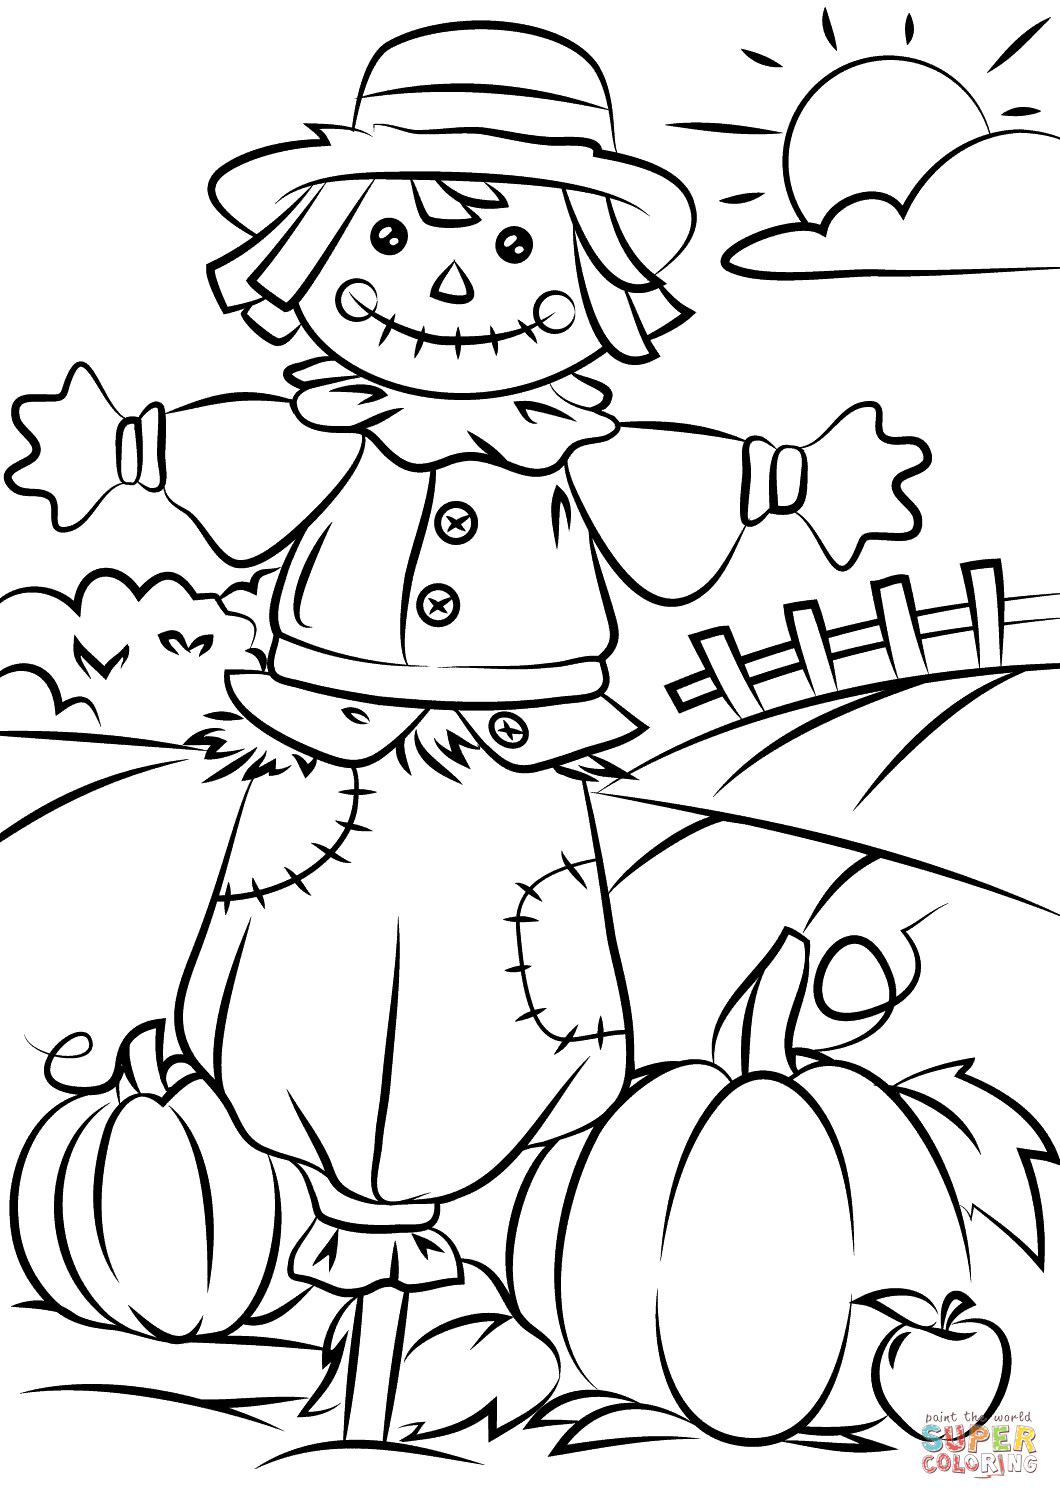 Free Printable Autumn Coloring Pages
 Autumn Scene with Scarecrow coloring page